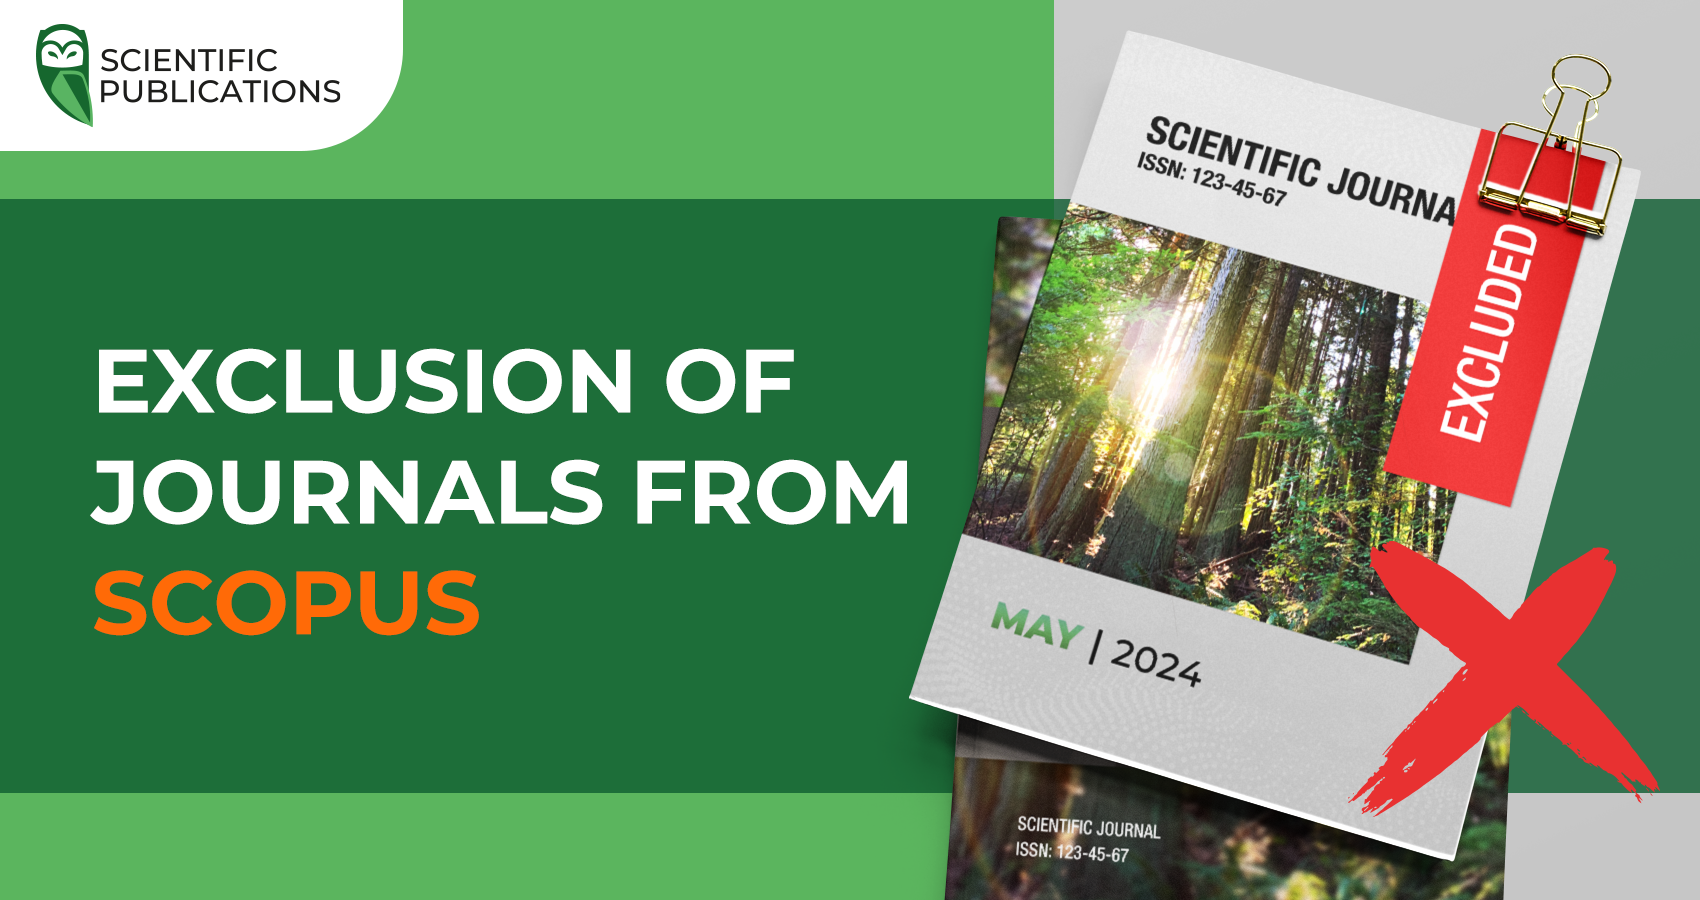 Exclusion of journals from Scopus in May 2024